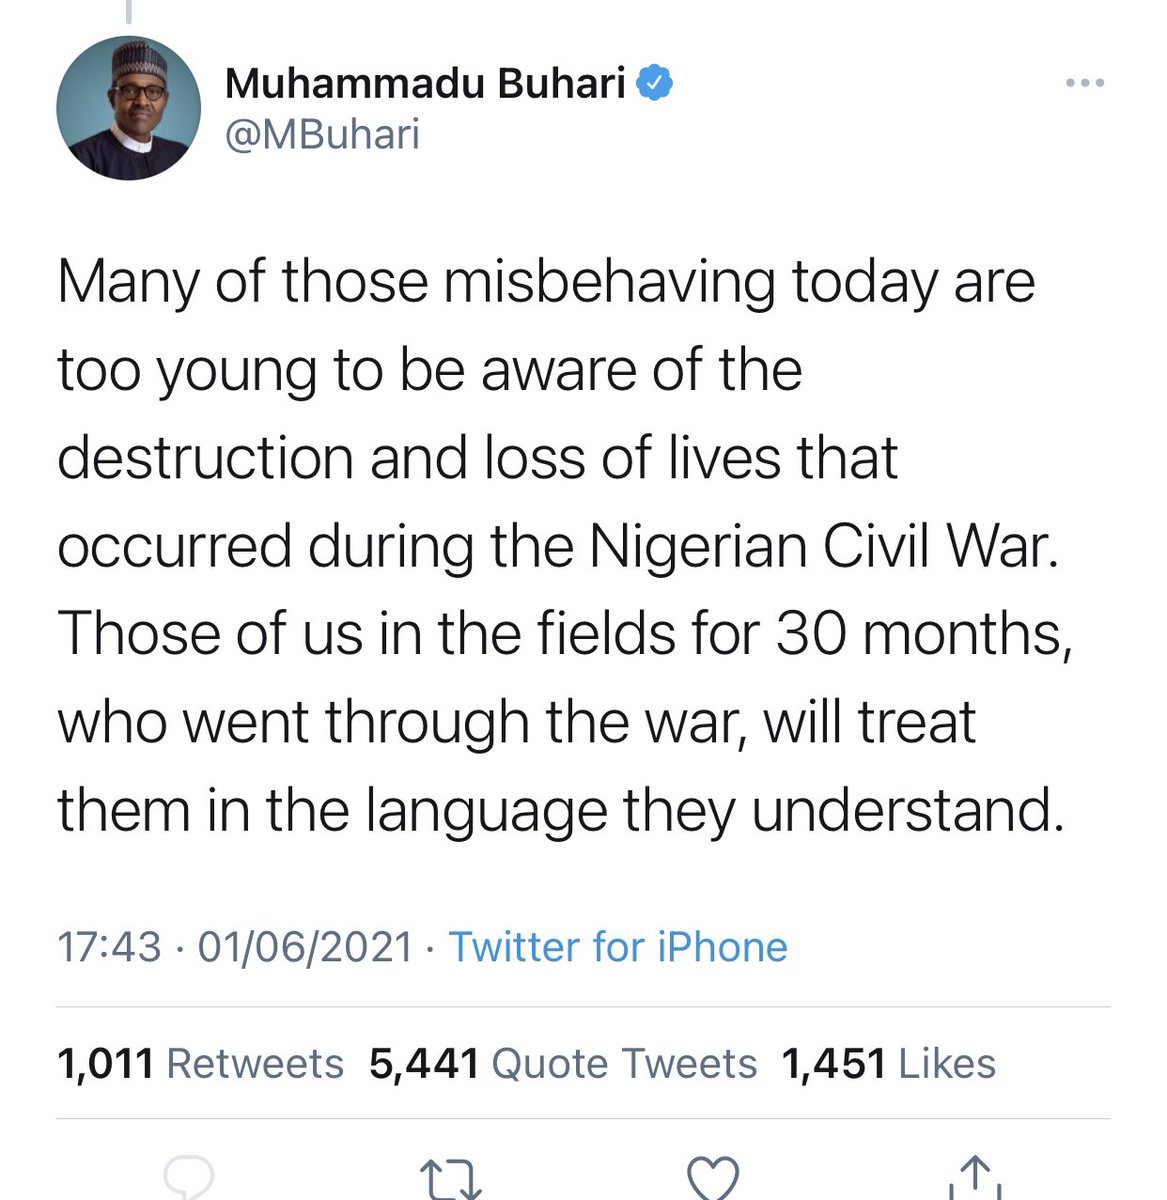 When Buhari speaks to bandits, He begs them. He appeals to them. But when Buhari speaks to citizens, He threatens us. He uses language that can be used to justify harm, violence and massacre against the same people he swore to protect. Please RT for the world to help Nigeria.